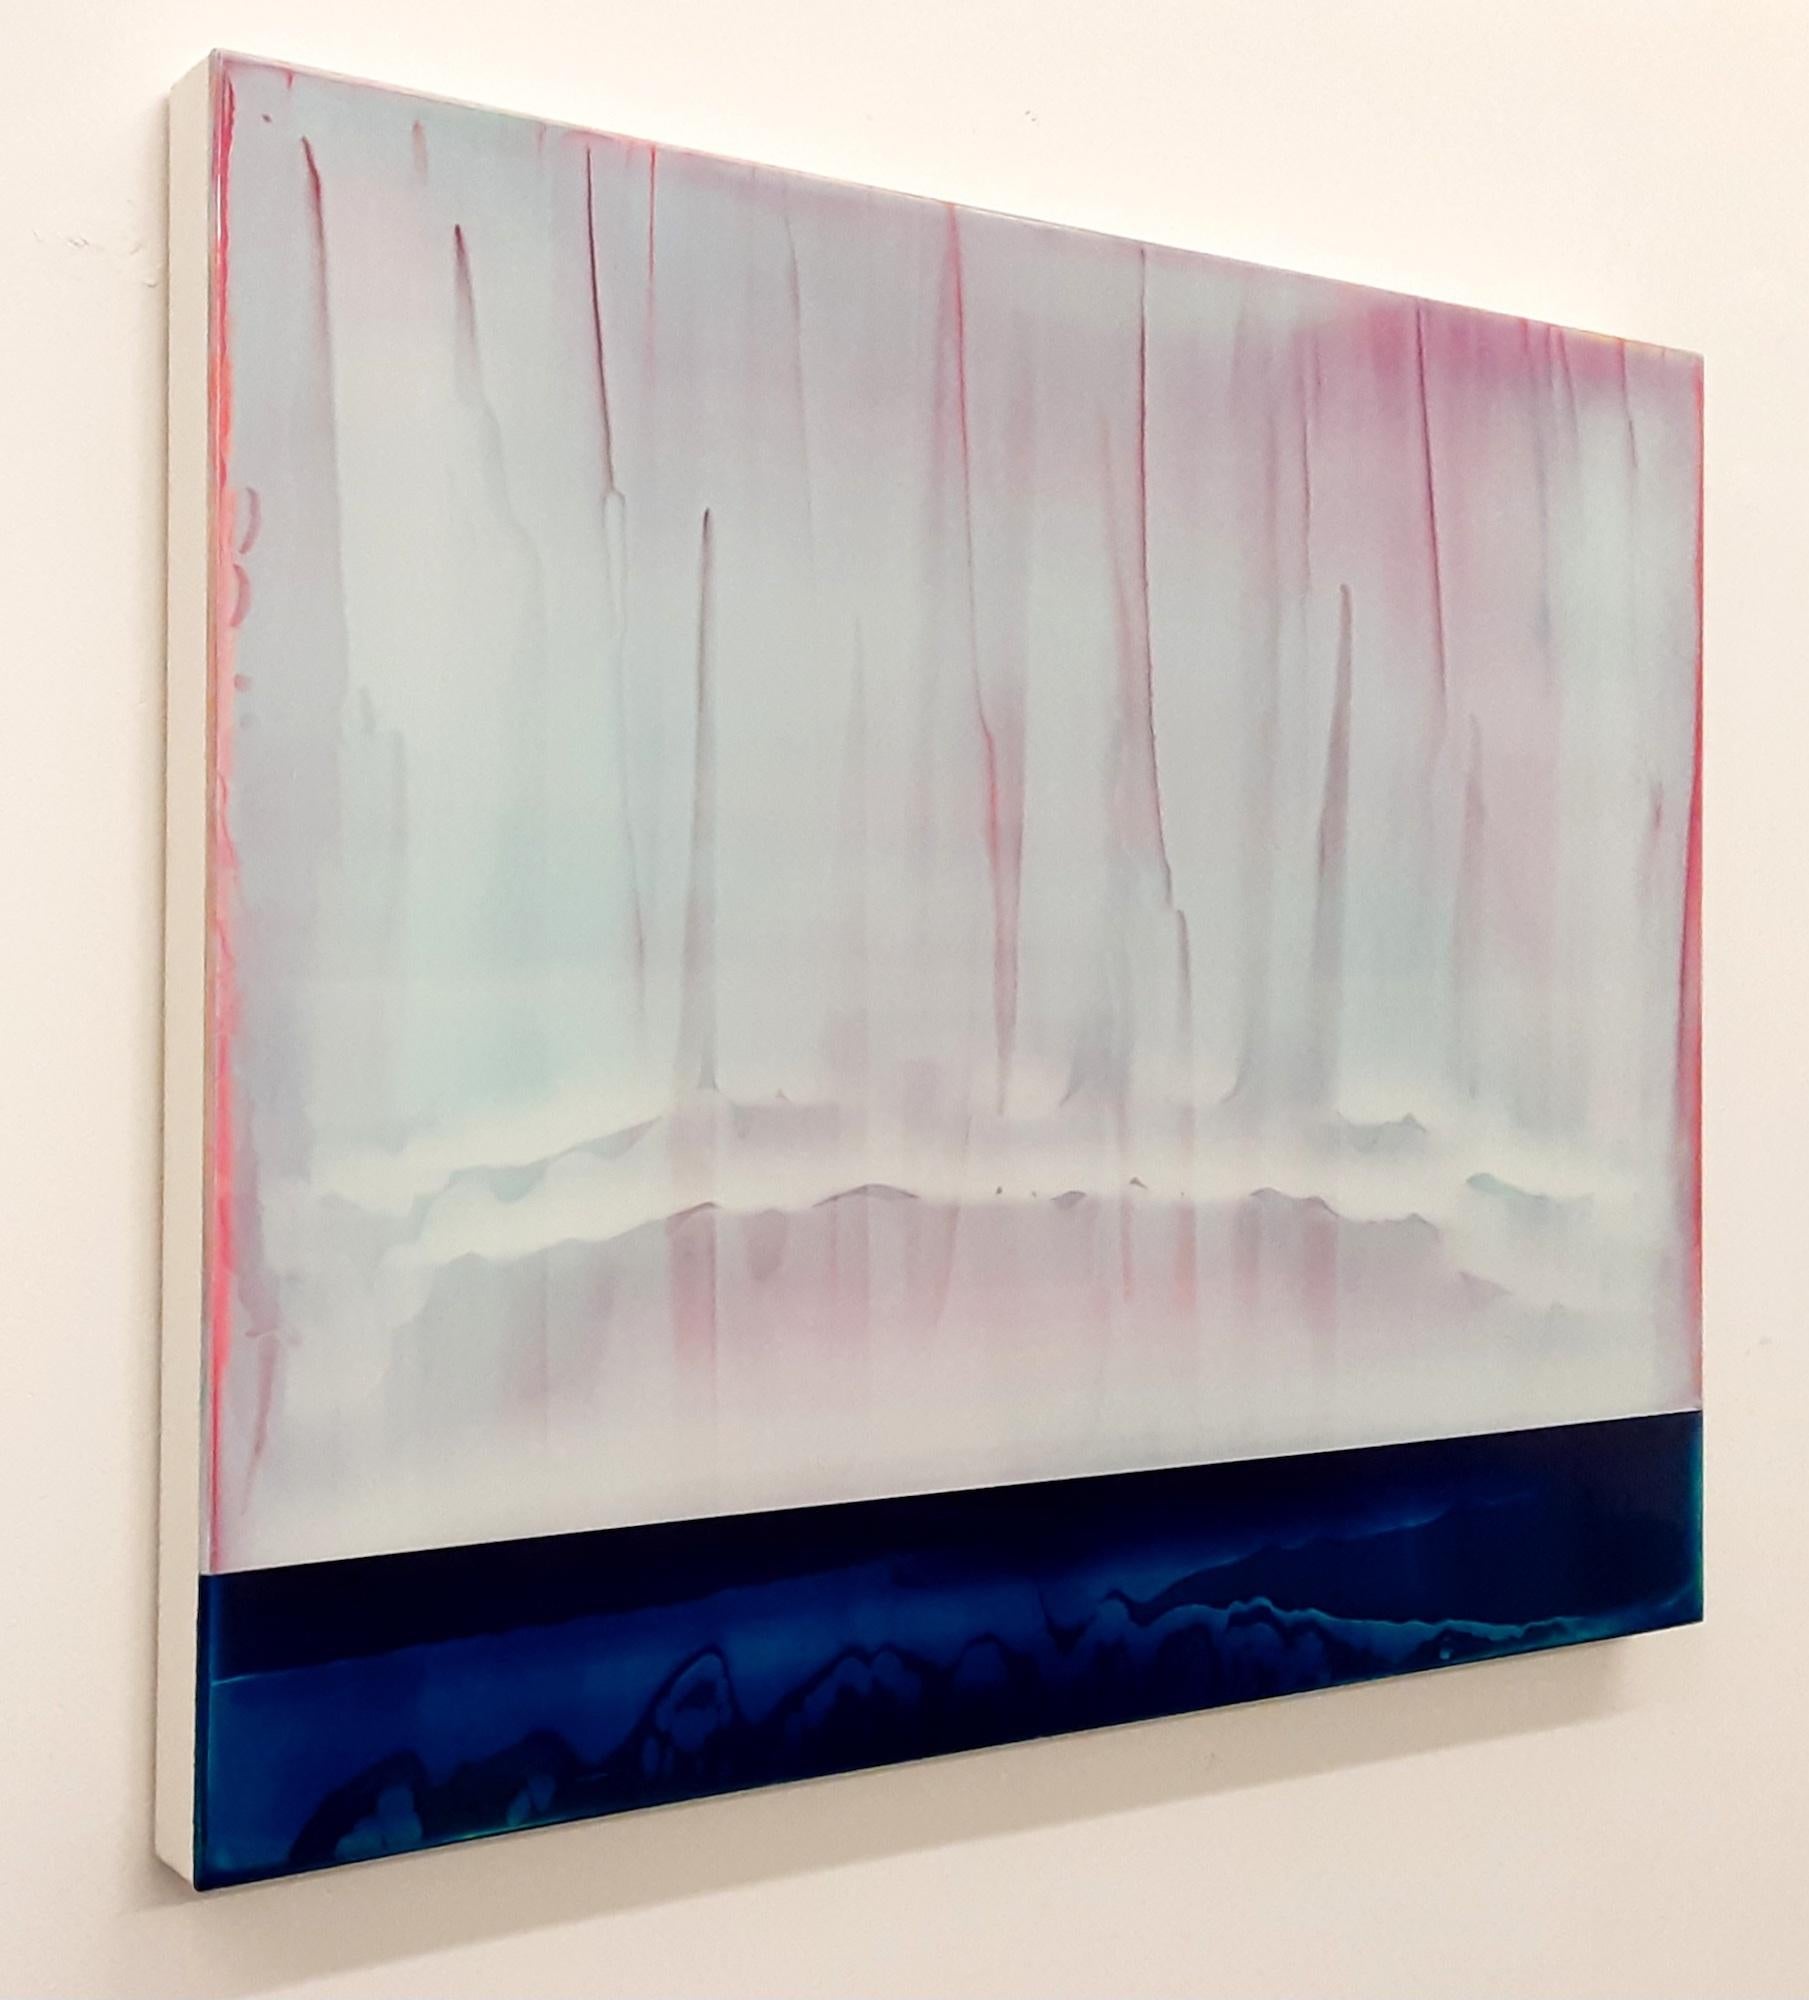 Lucent (4/19) by James Lumsden - Abstract colour painting, pink and light blue For Sale 2